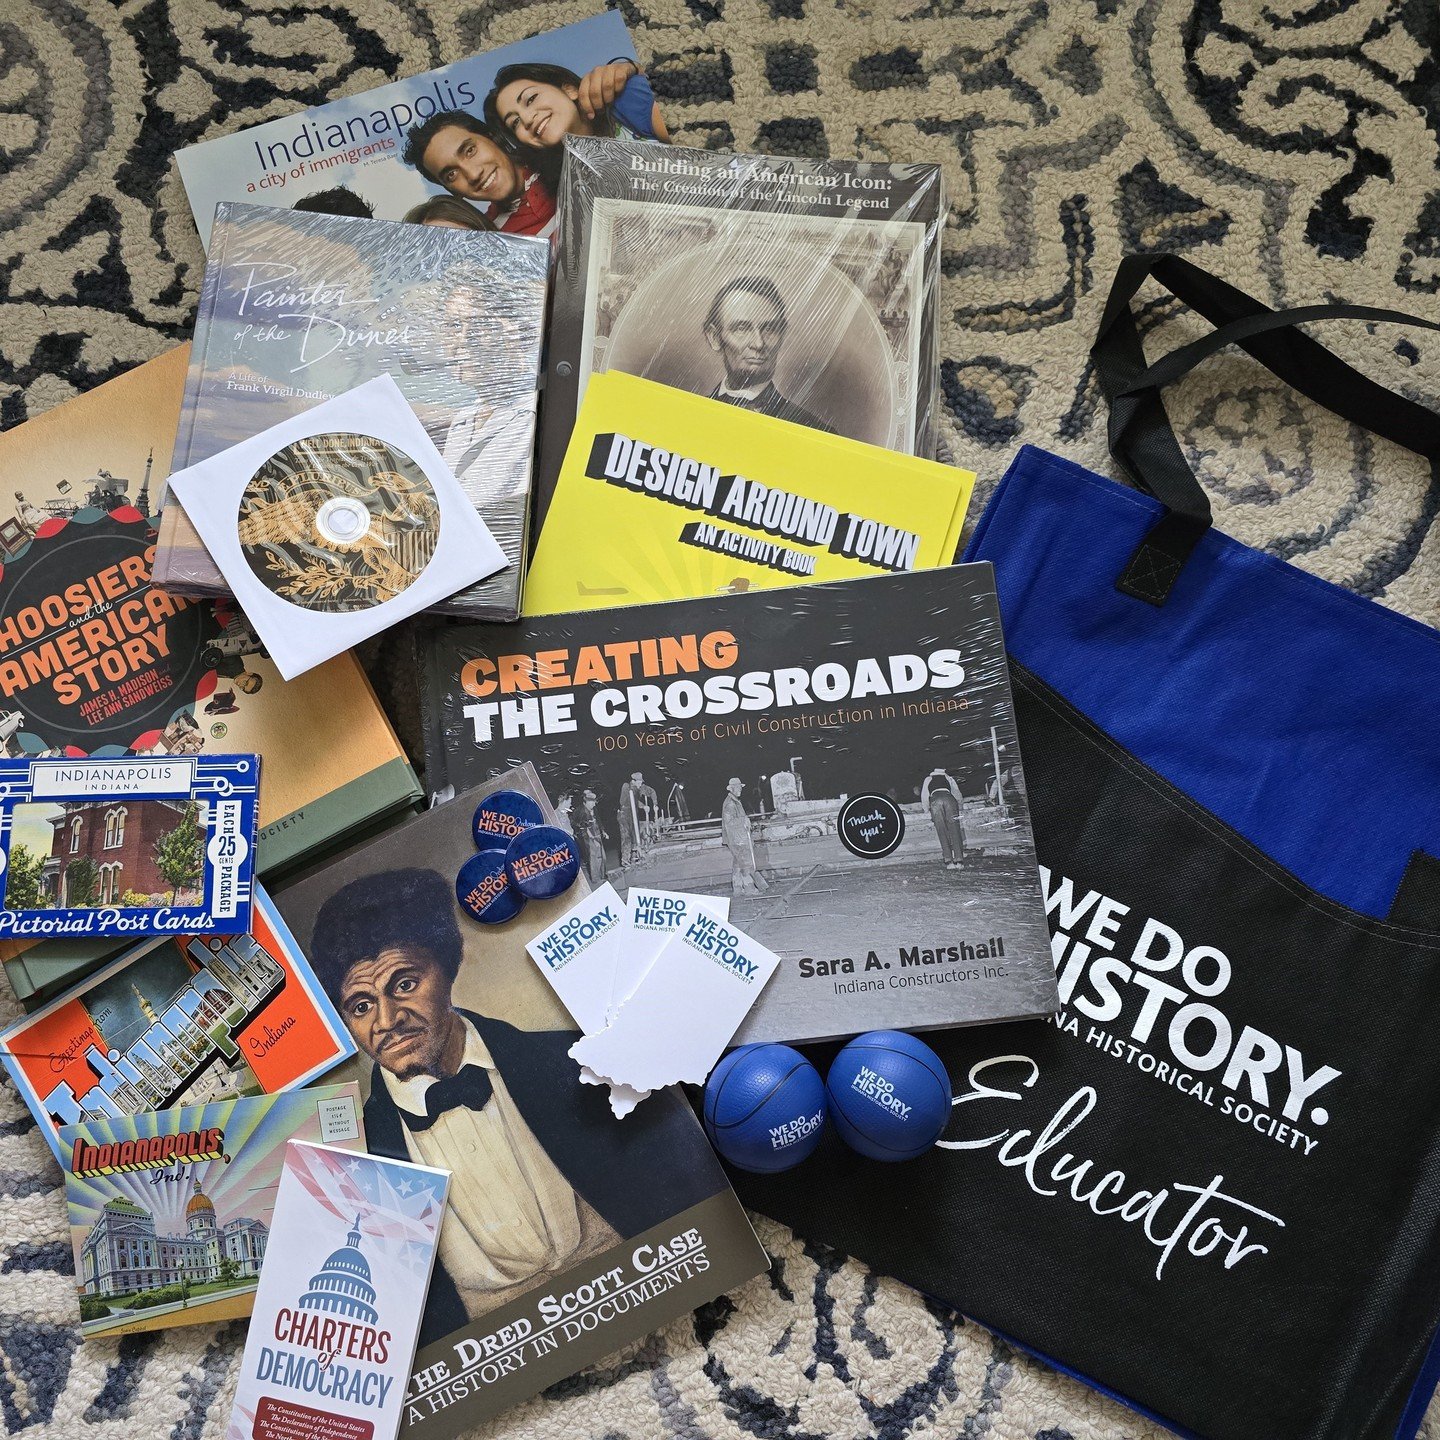 It's going to be a great day at the Midwest Homeschool Expo on June 22! Thank you to the @indianahistory for contributing 2 of these fantastic gift bags as prizes!
https://indianahistory.org/
If you don't have tickets yet...now is the time to get the